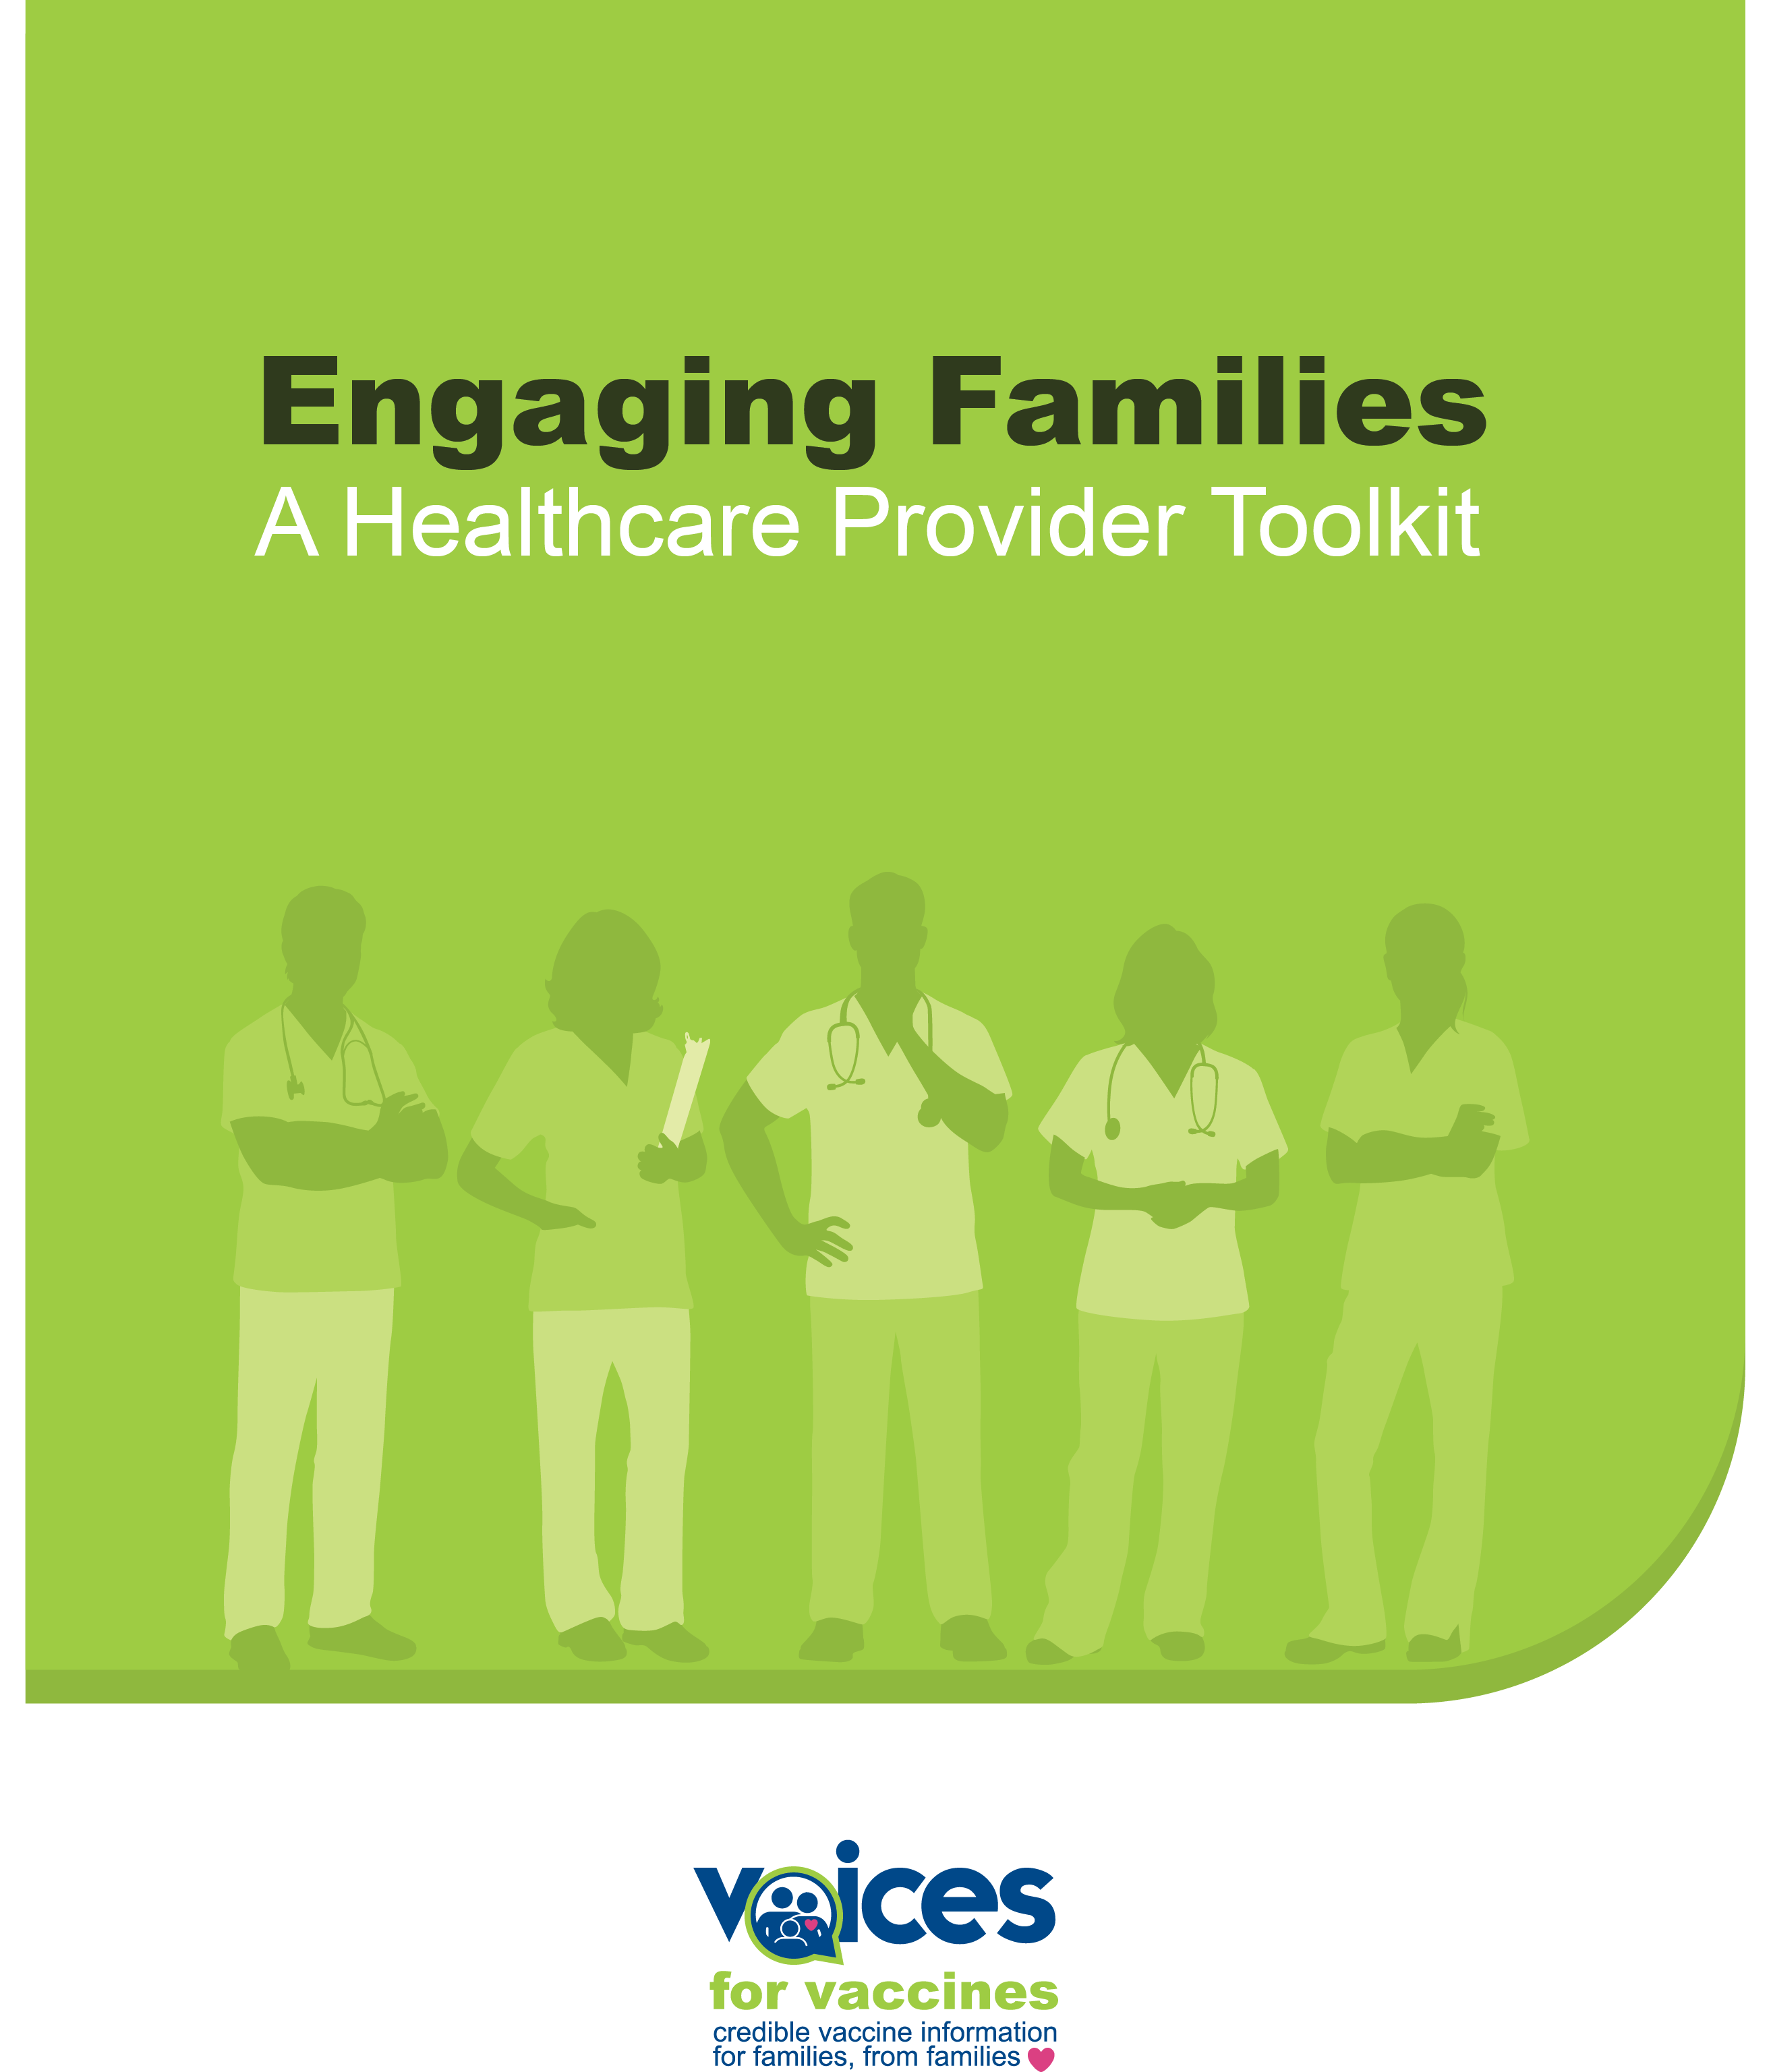 Healthcare Provider Toolkit